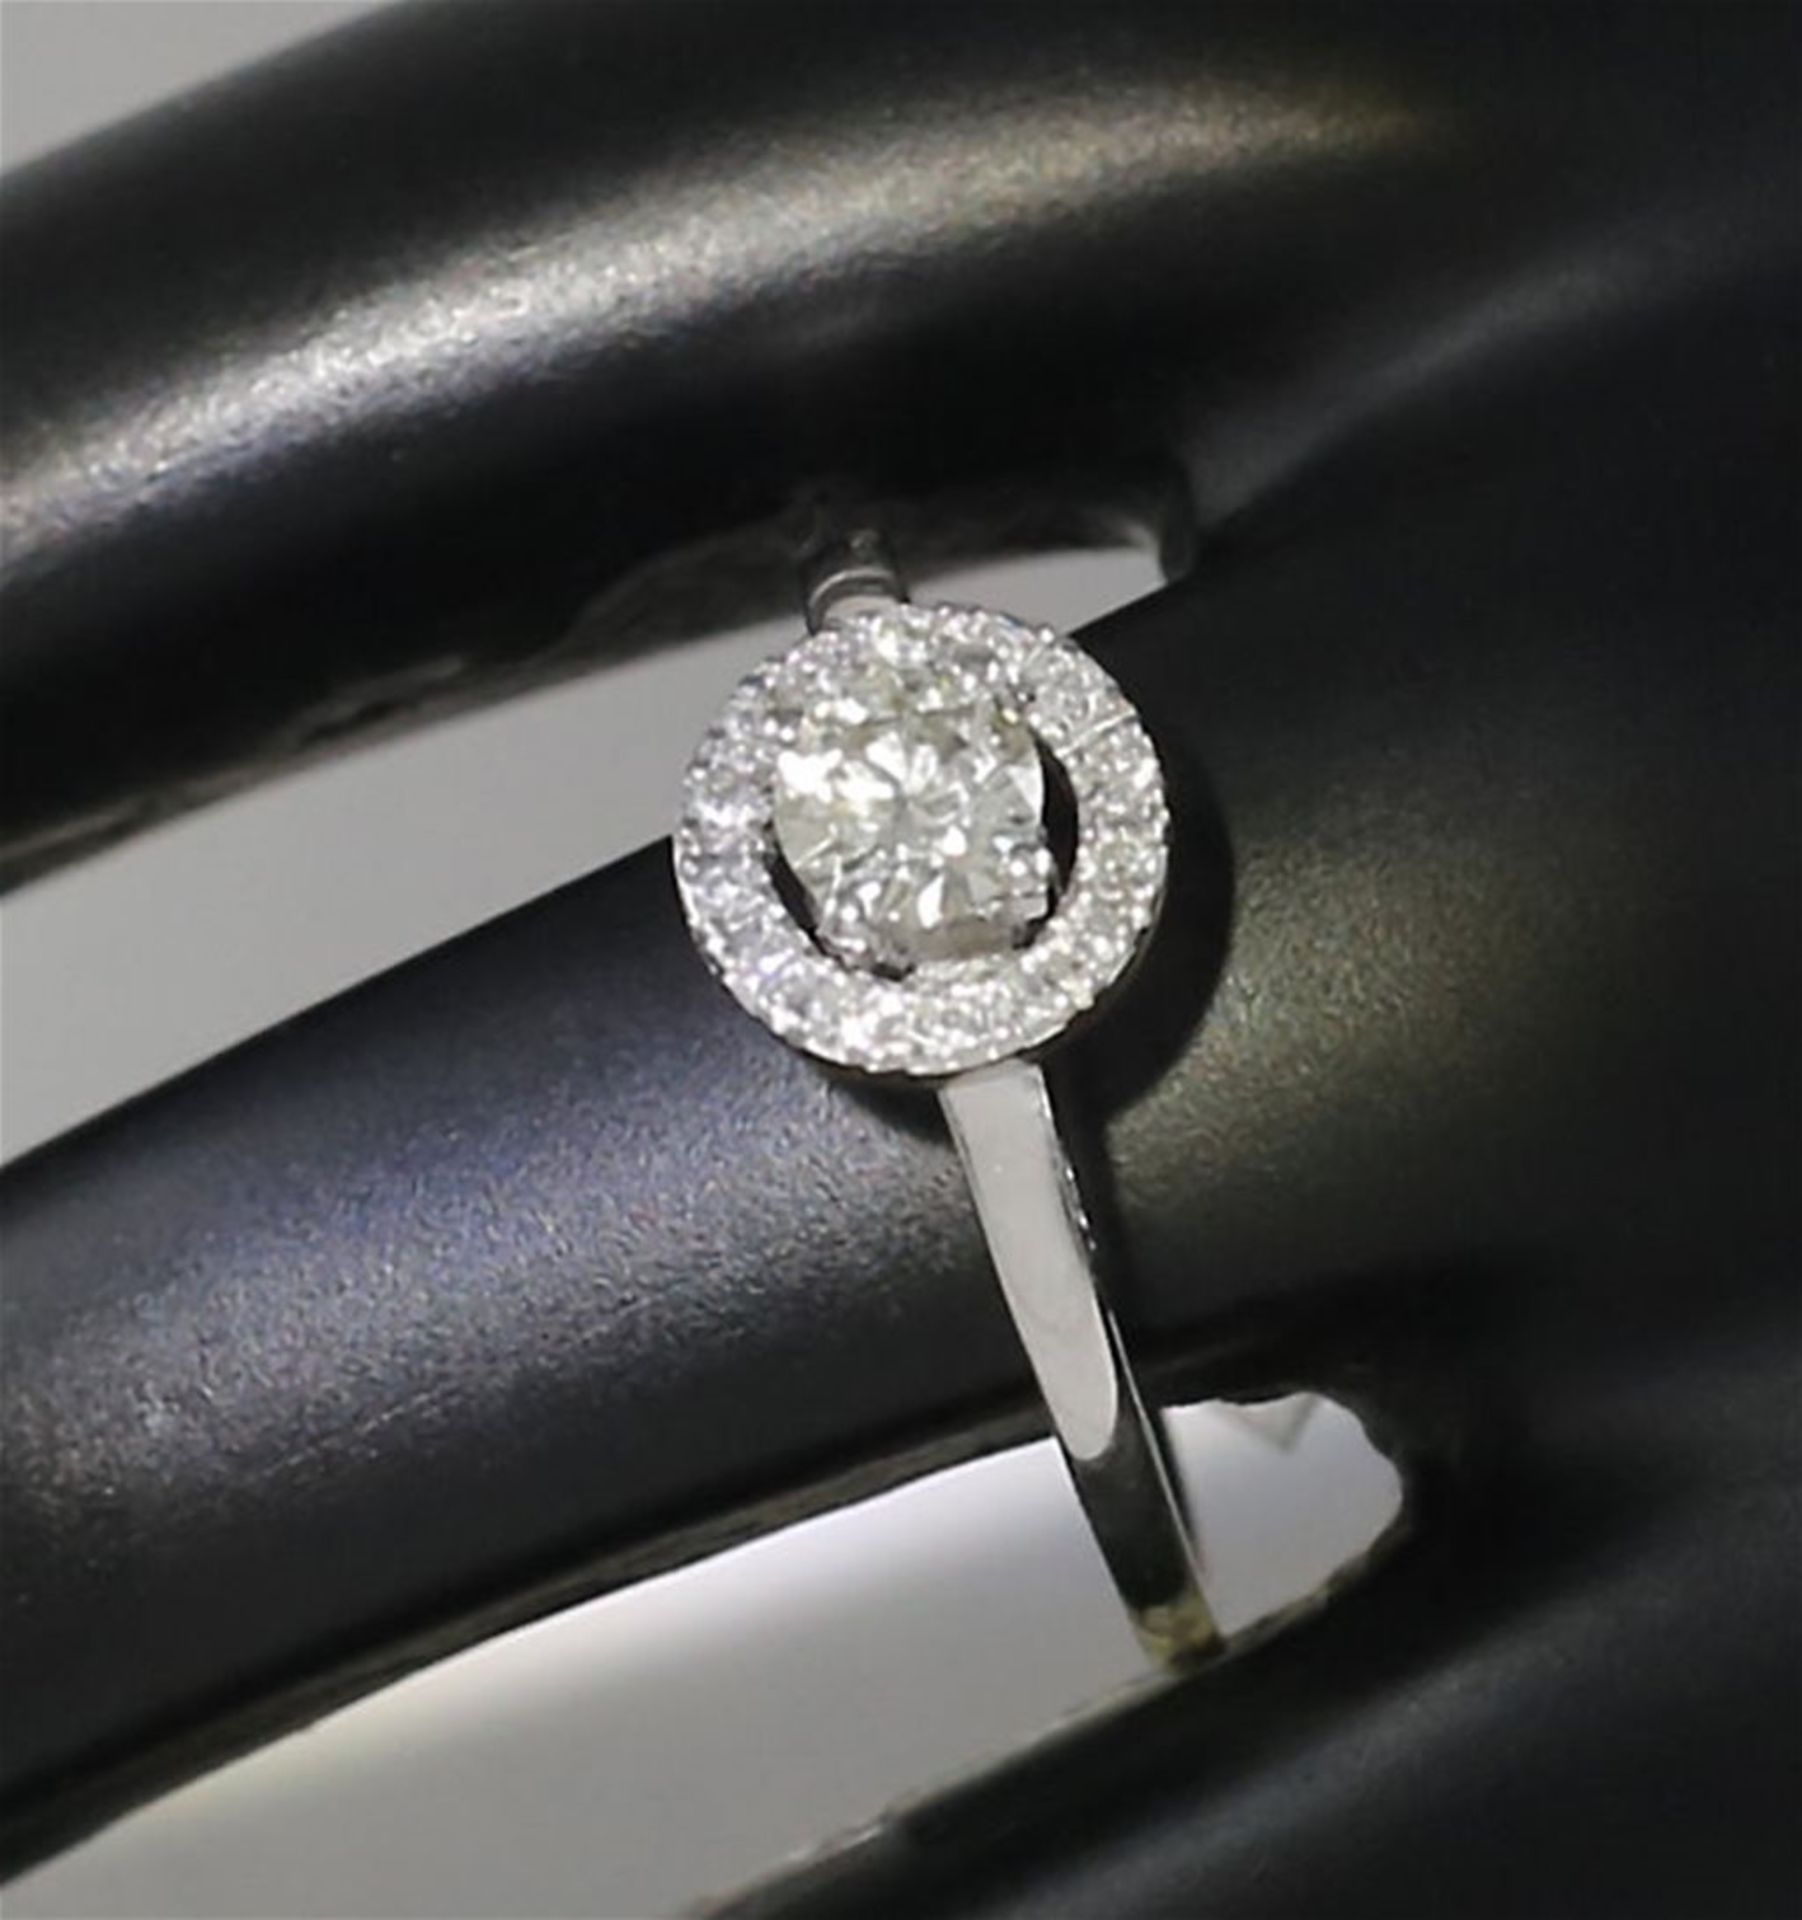 14 K / 585 White Gold Solitaire Diamond Ring - Image 7 of 7